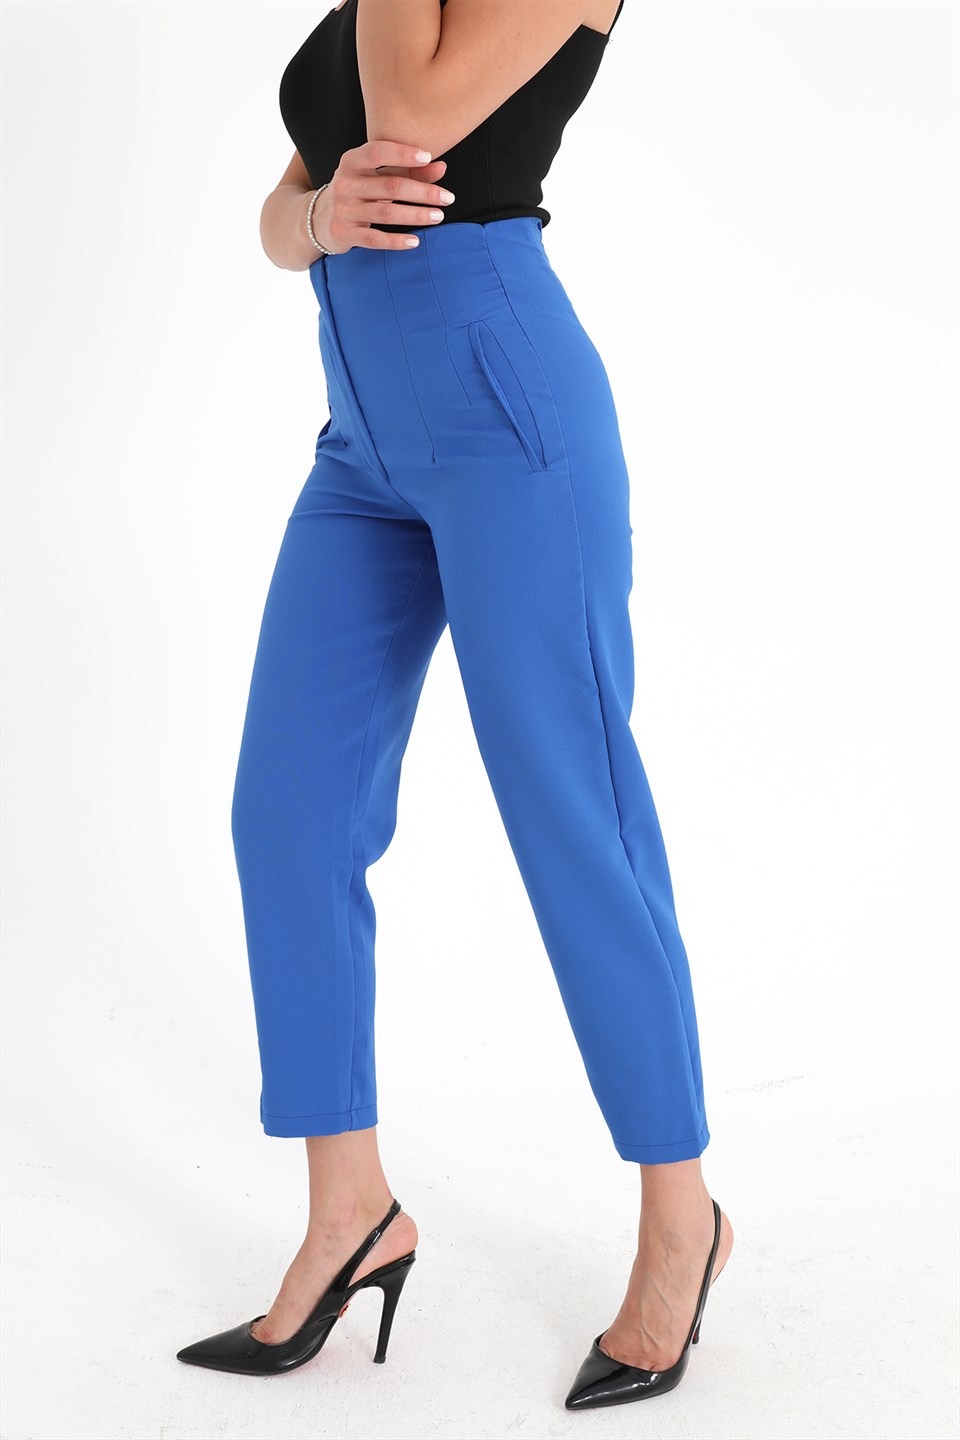 Women's High Waist Stretched Atlas Fabric Trousers - Sax Blue - STREETMODE™